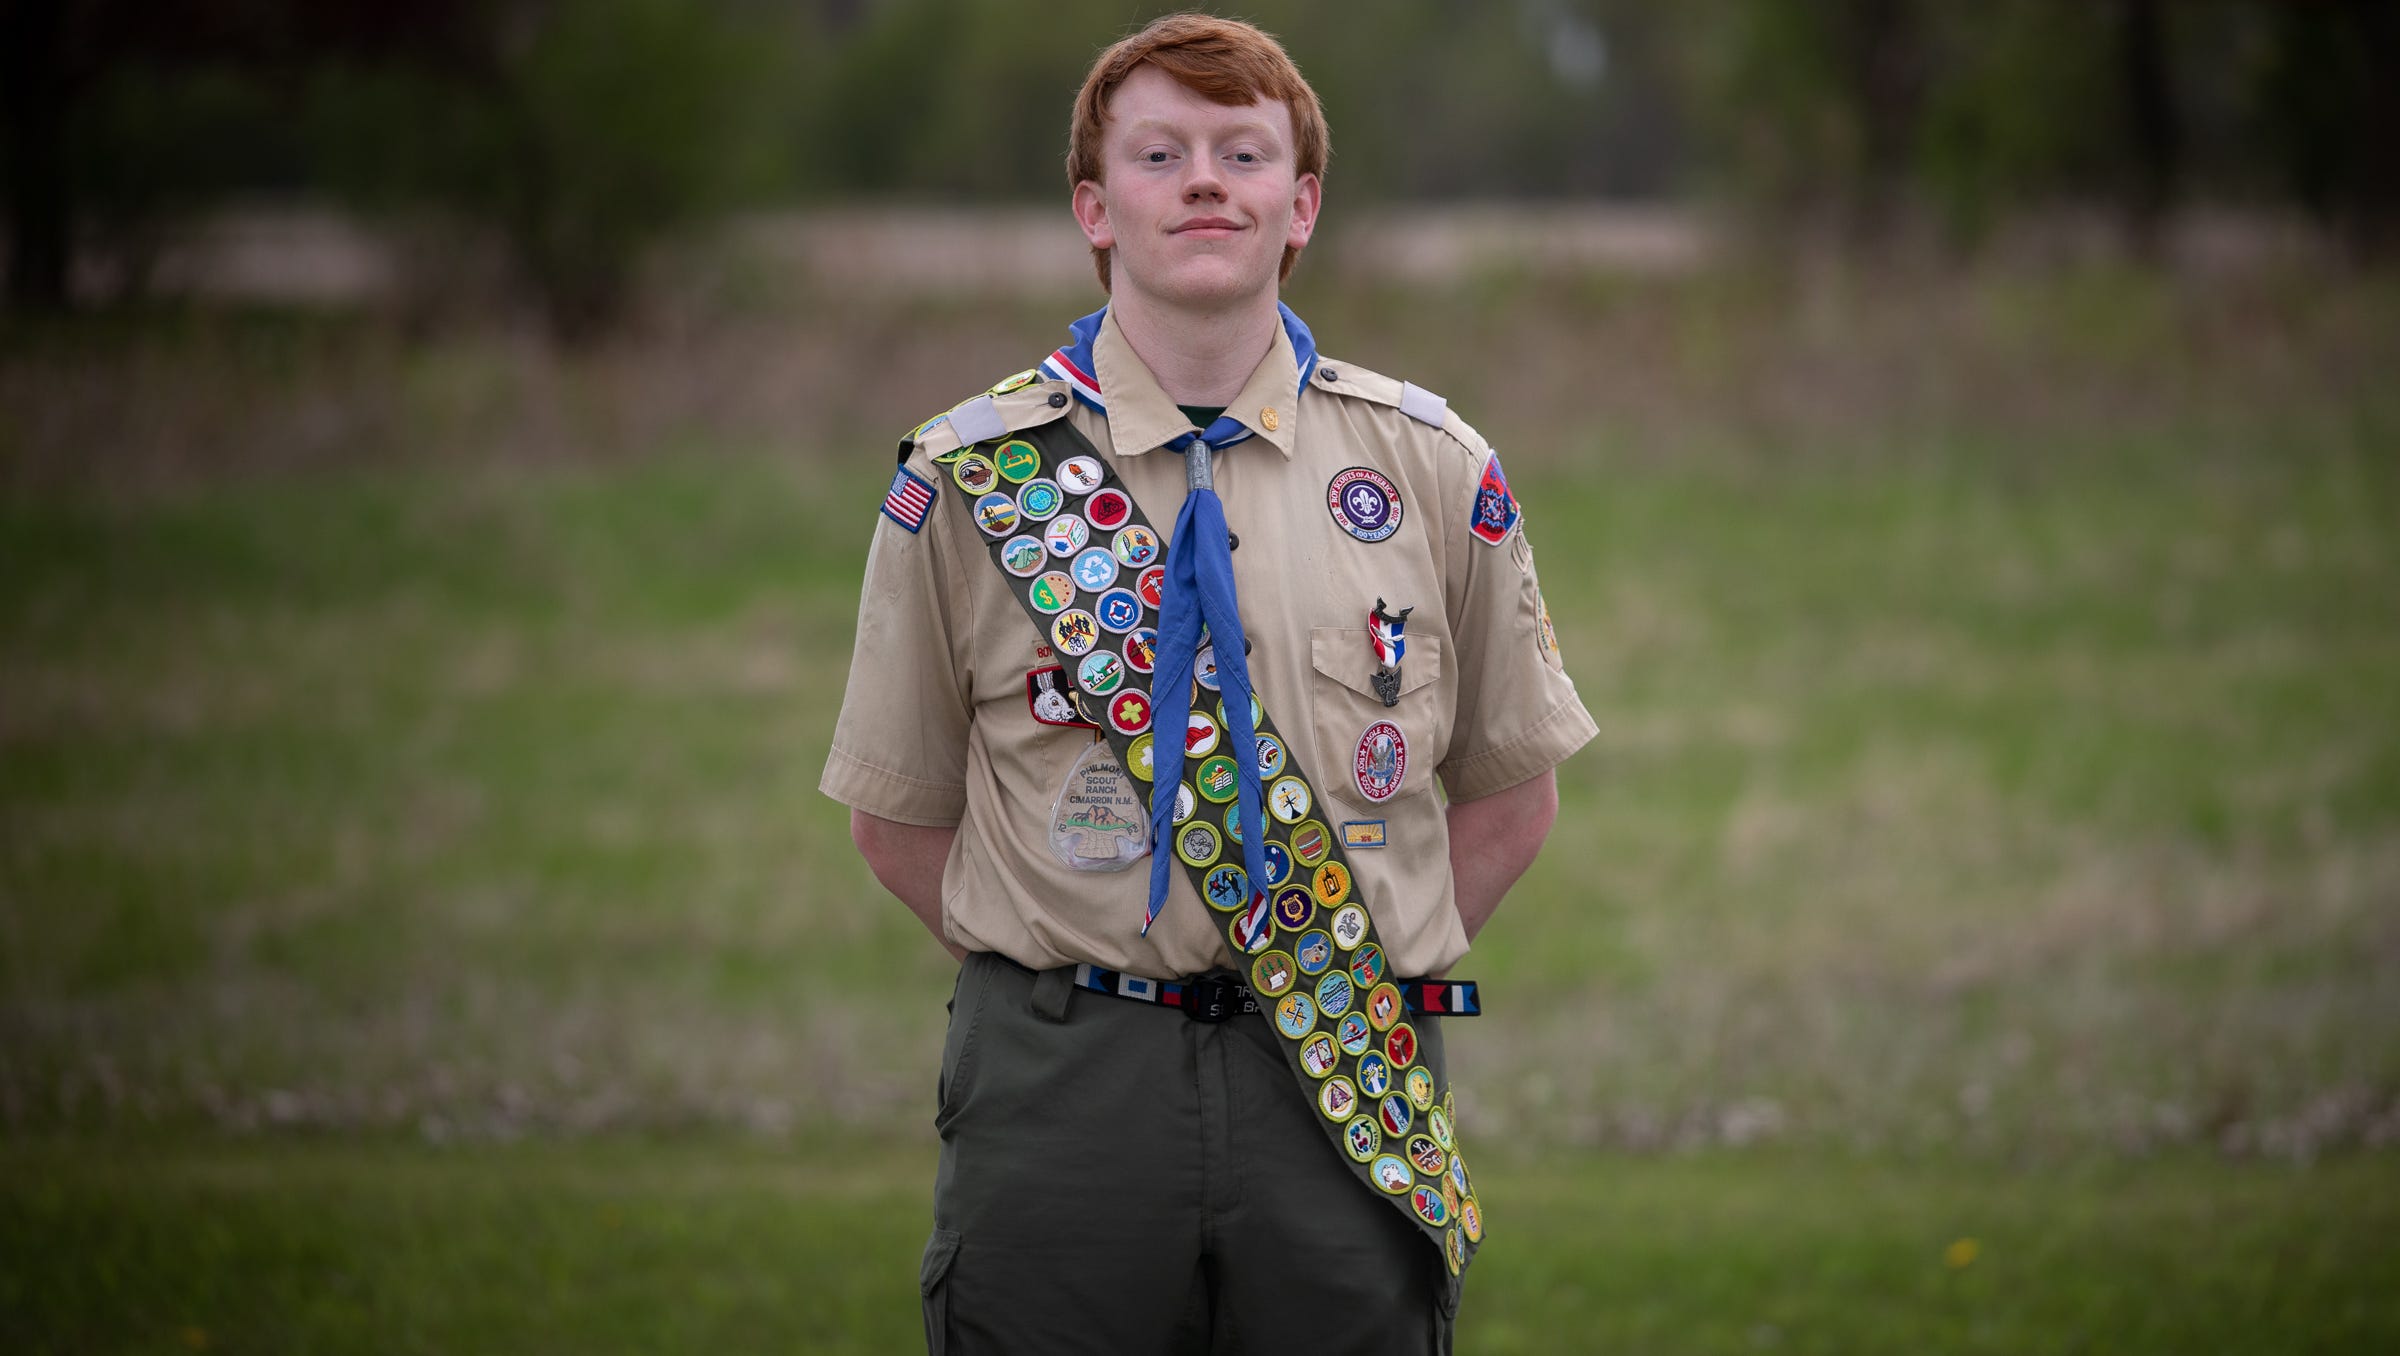 Boy Scouts Wisconsin Teen Earns 140th And Final Merit Badge 3713